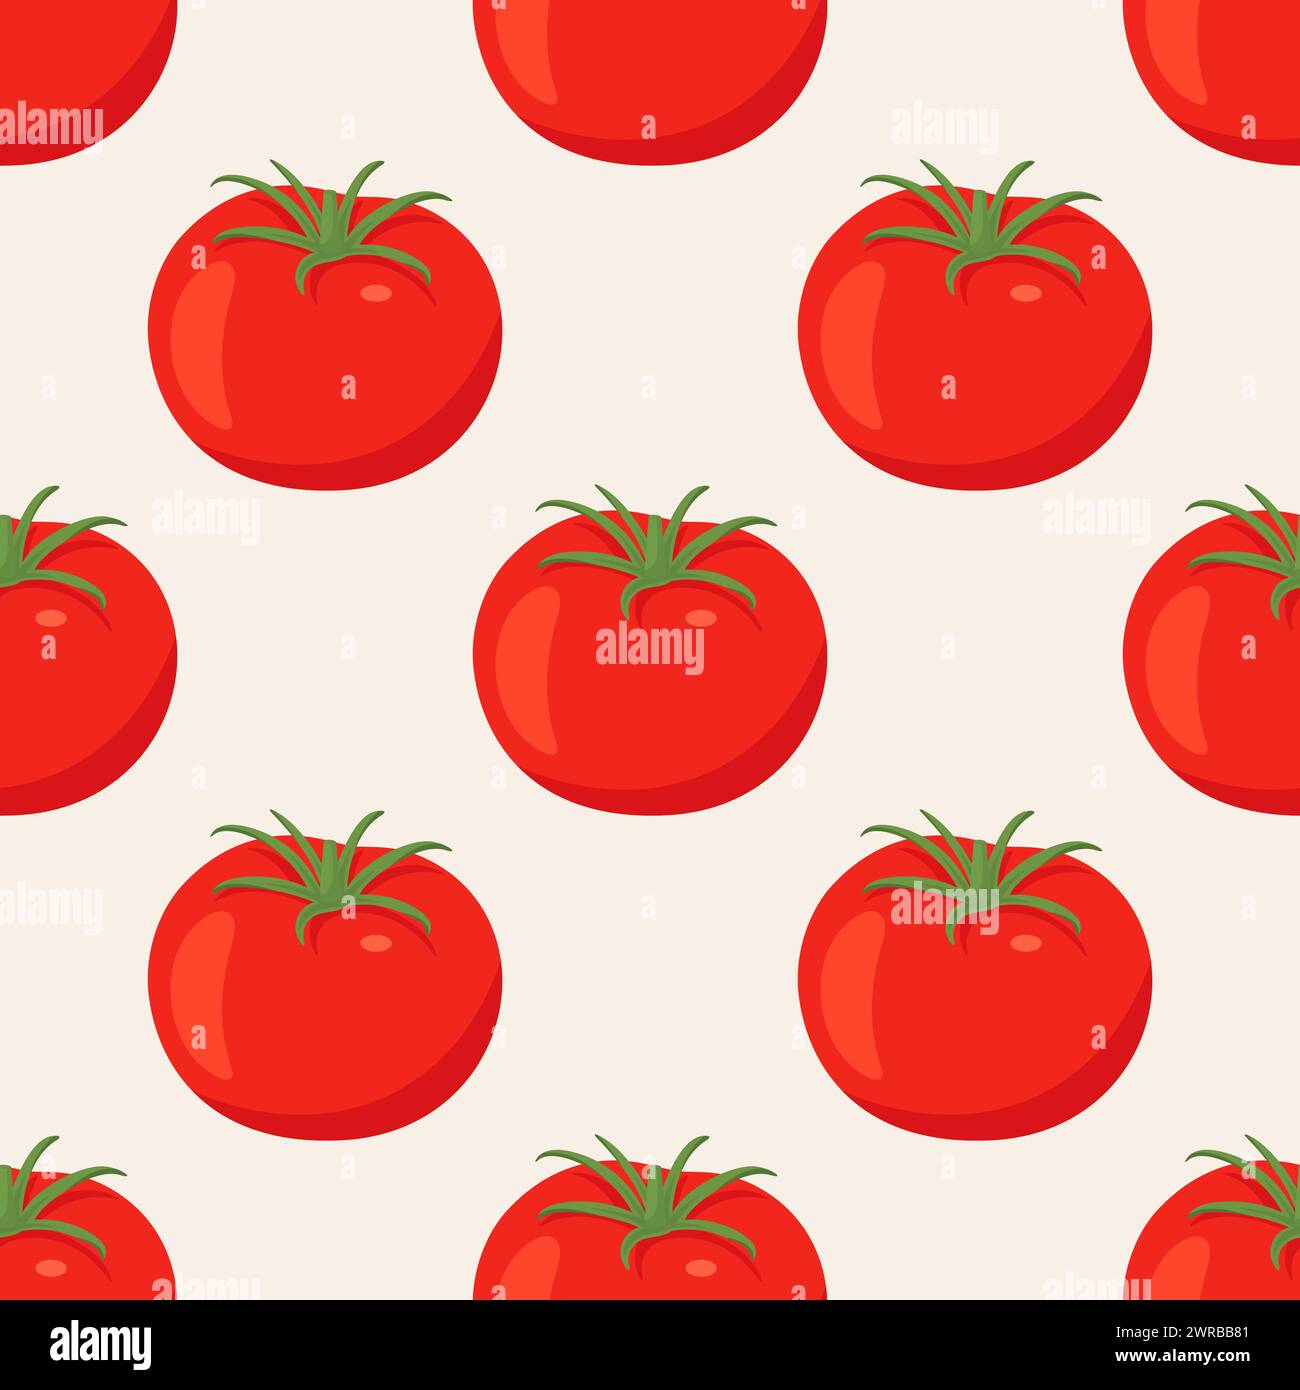 Flat Vector Seamless Pattern with Fresh Tomato on a White Background. Seamless Vegetable Print with Whole Tomatoes Stock Vector